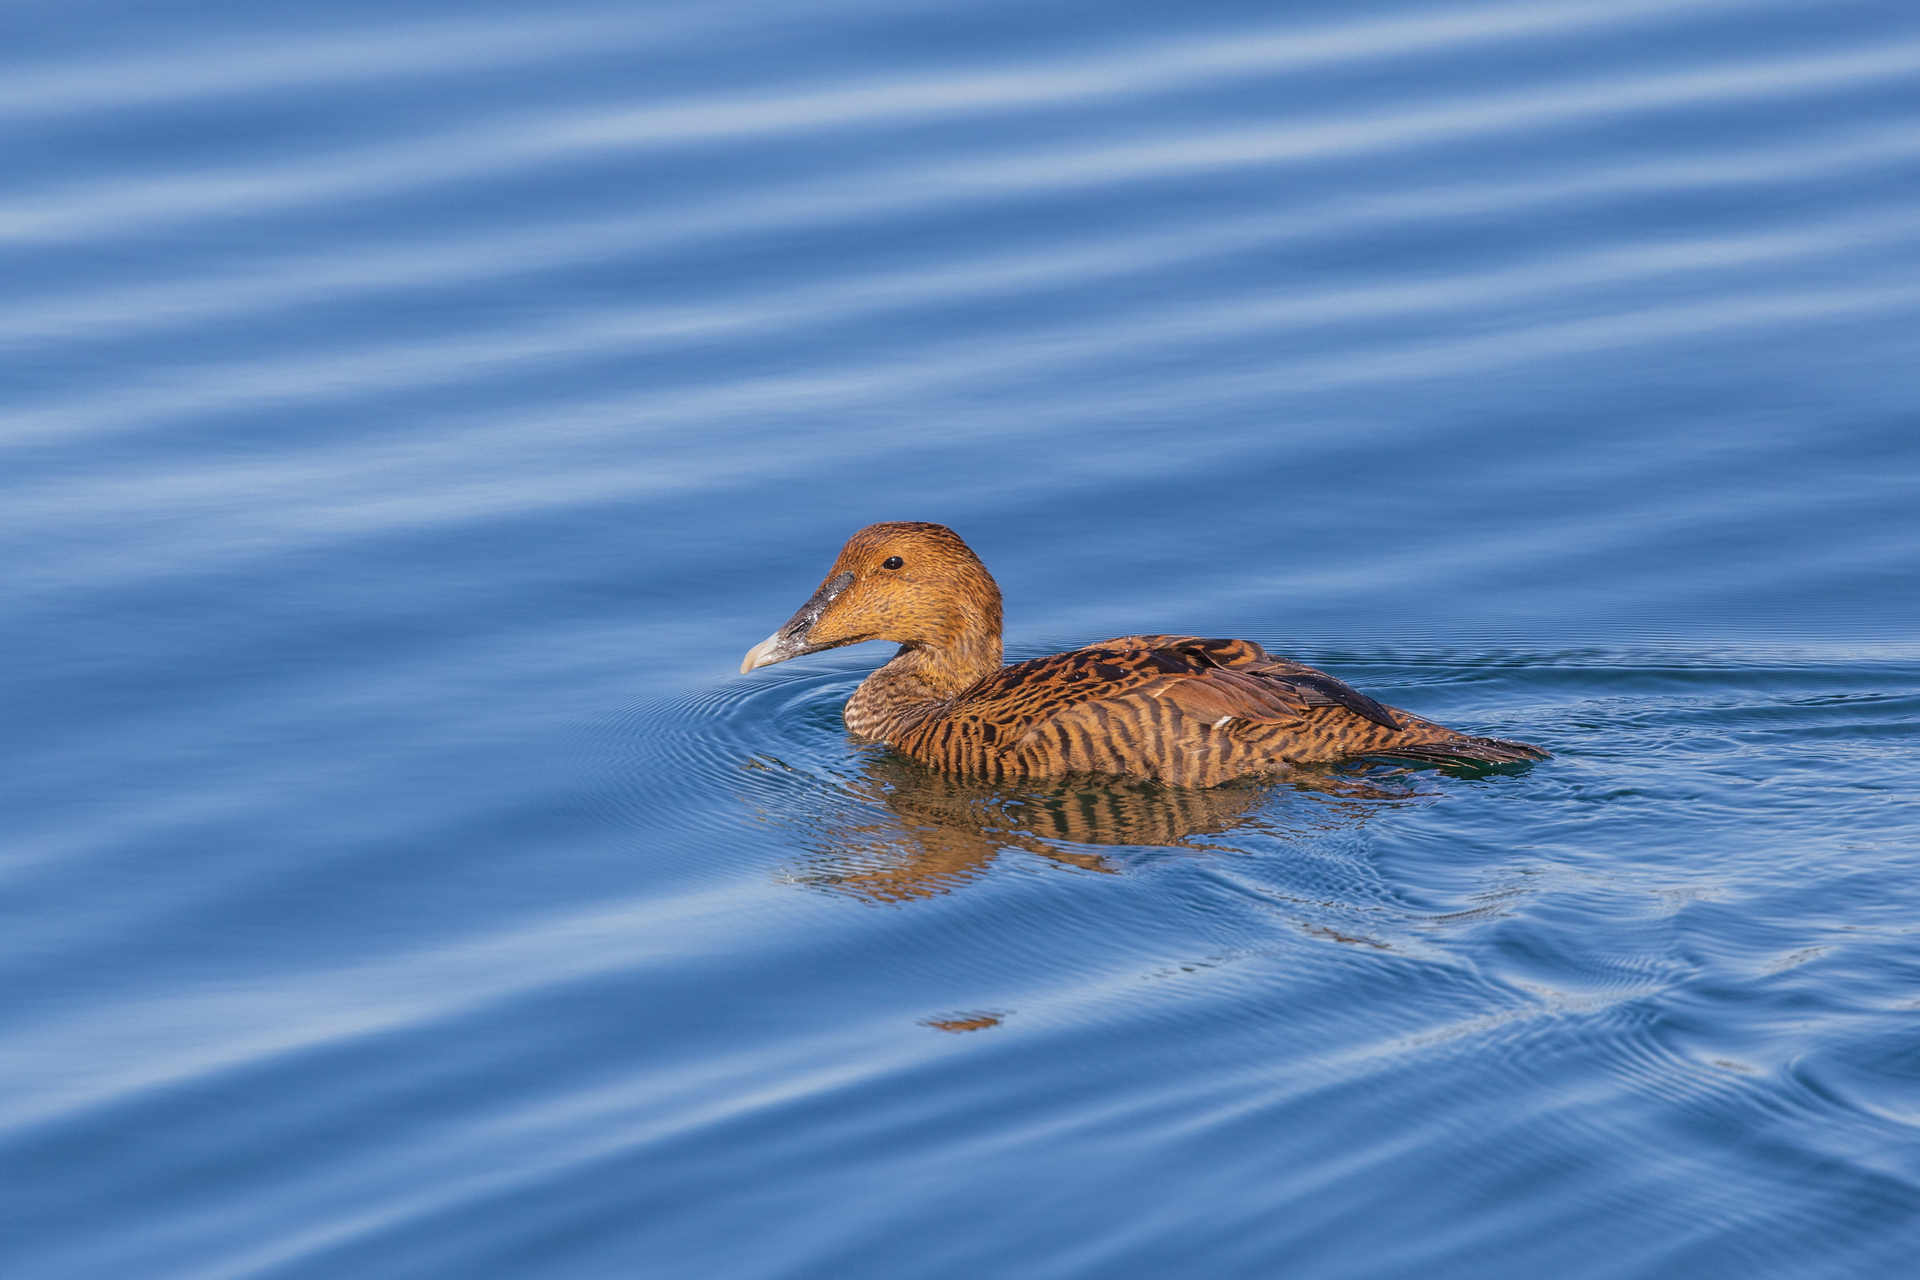 A brown duck with an elongated beak swims in the water. It's wings and backside are striped with black bands.